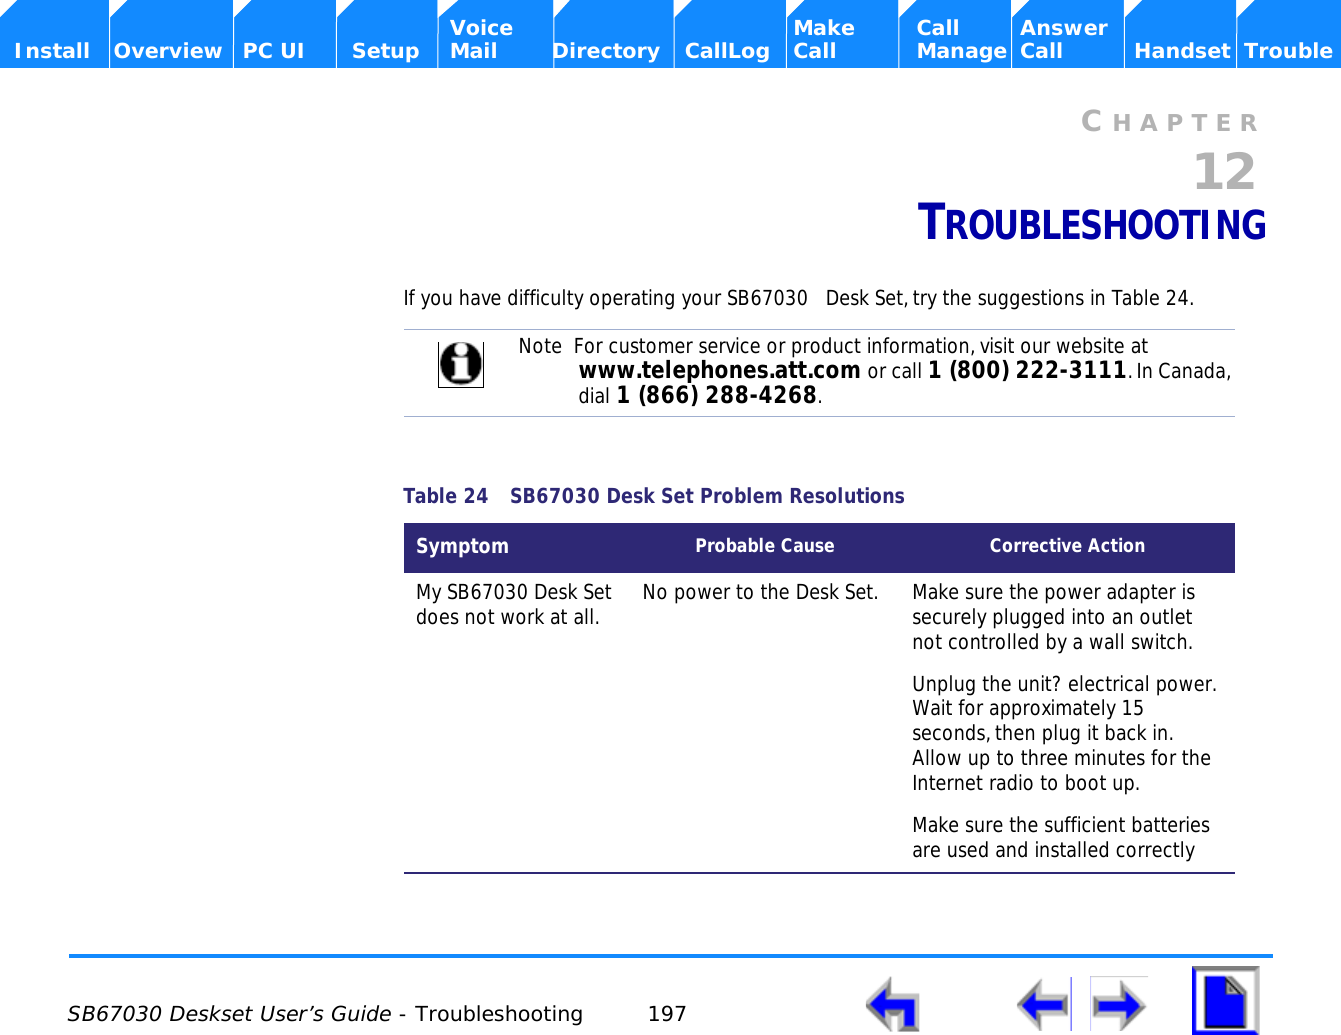  SB67030 Deskset User’s Guide - Troubleshooting 197    Voice Make Call Answer  Install Overview PC UI Setup Mail Directory CallLog Call Manage Call Handset TroubleCHAPTER12TROUBLESHOOTINGIf you have difficulty operating your SB67030   Desk Set, try the suggestions in Table 24.Note  For customer service or product information, visit our website at www.telephones.att.com or call 1 (800) 222-3111. In Canada, dial 1 (866) 288-4268.Table 24  SB67030 Desk Set Problem ResolutionsSymptom Probable Cause Corrective ActionMy SB67030 Desk Set does not work at all. No power to the Desk Set. Make sure the power adapter is securely plugged into an outlet not controlled by a wall switch.Unplug the unit? electrical power. Wait for approximately 15 seconds, then plug it back in. Allow up to three minutes for the Internet radio to boot up.Make sure the sufficient batteries are used and installed correctly